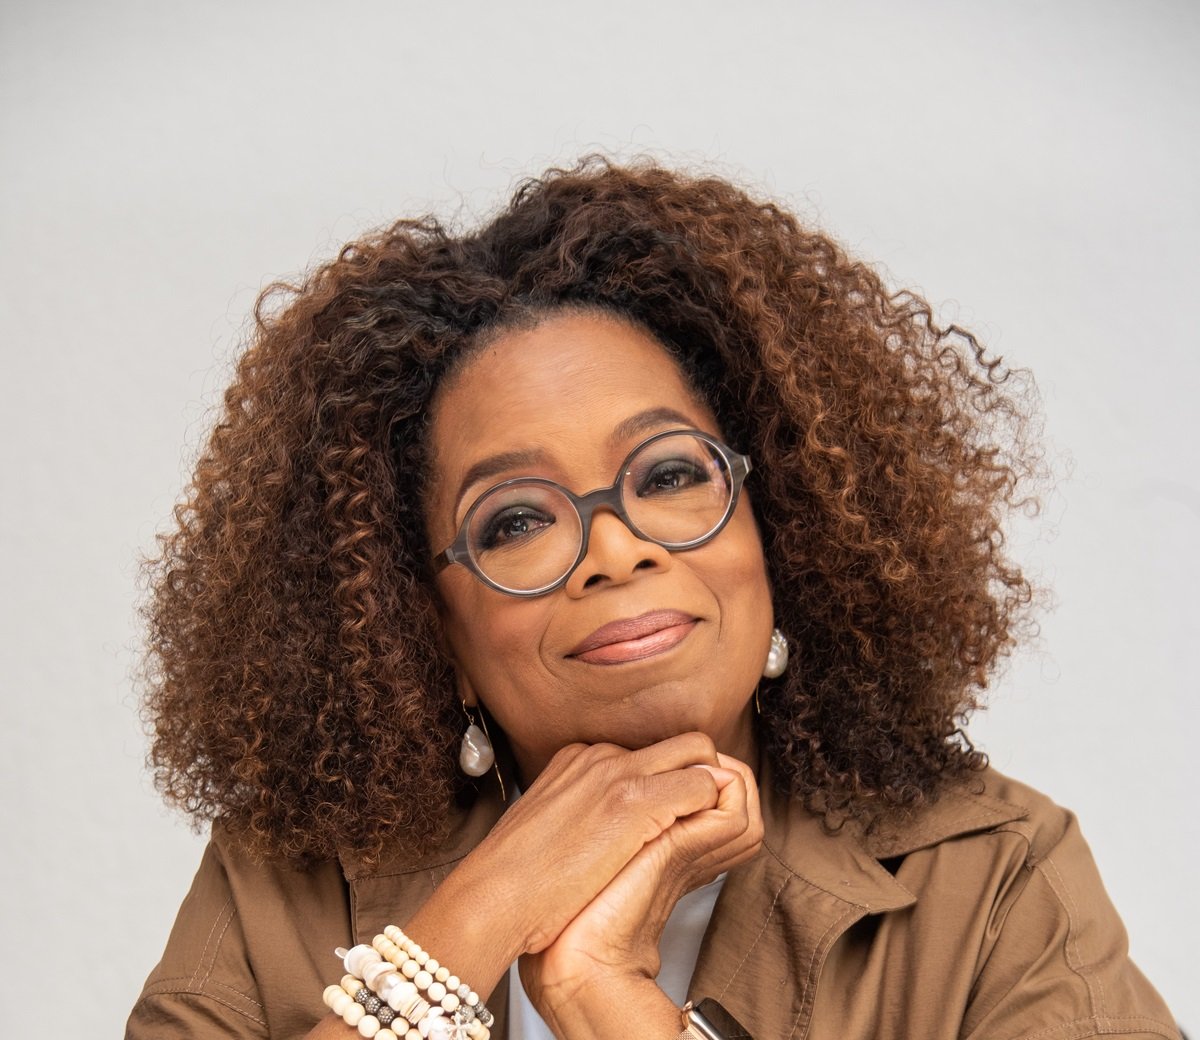 Oprah Winfrey poses for a promotional phoot during the 'David Mkes Man' Press Conference in 2019